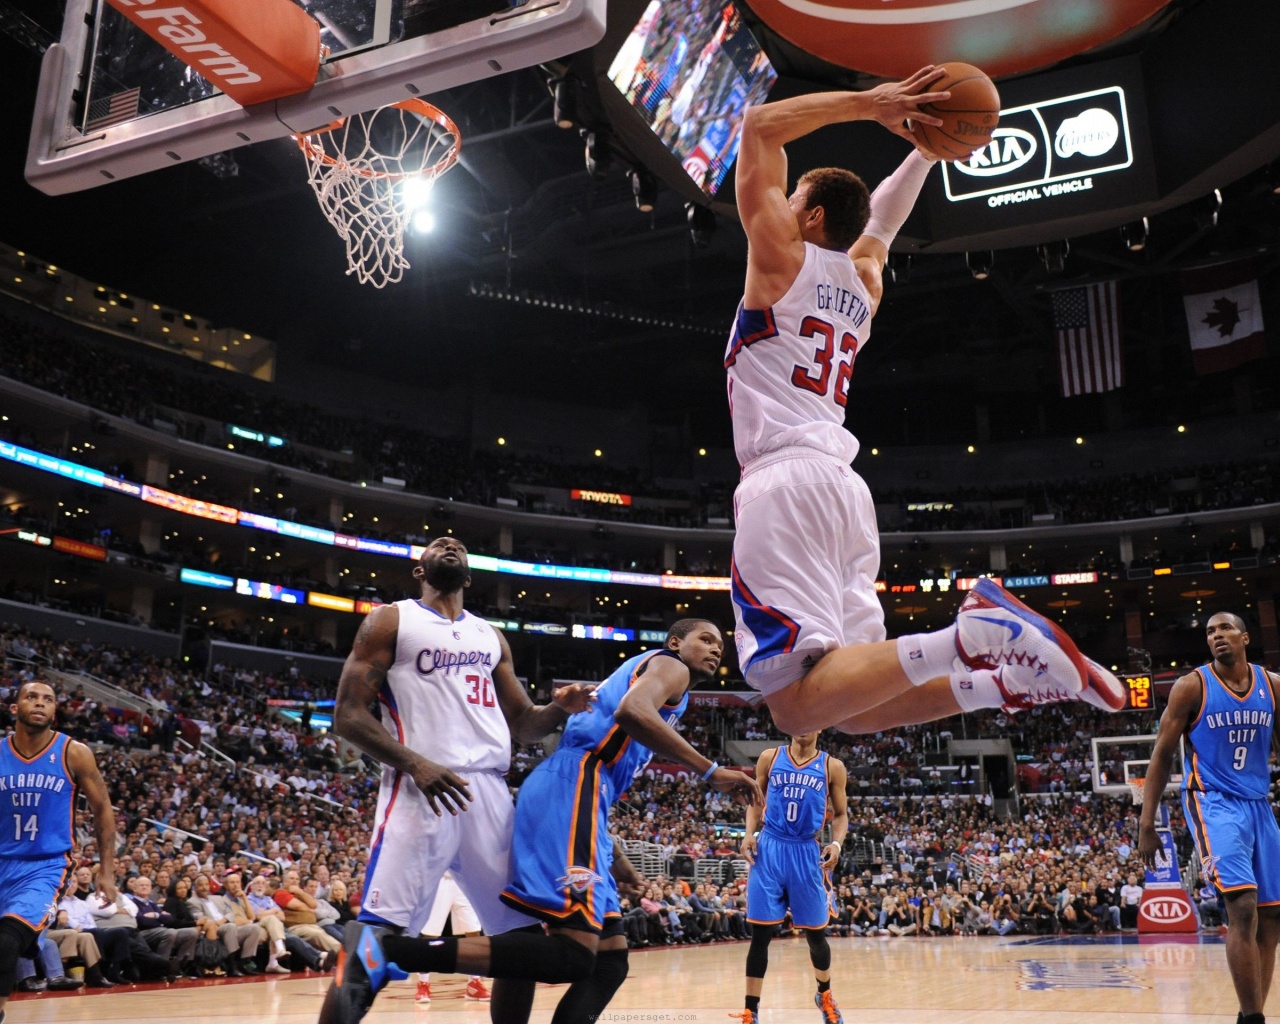 Los Angeles Clippers Nba American Professional Basketball Blake Griffin Dunk On Perkins